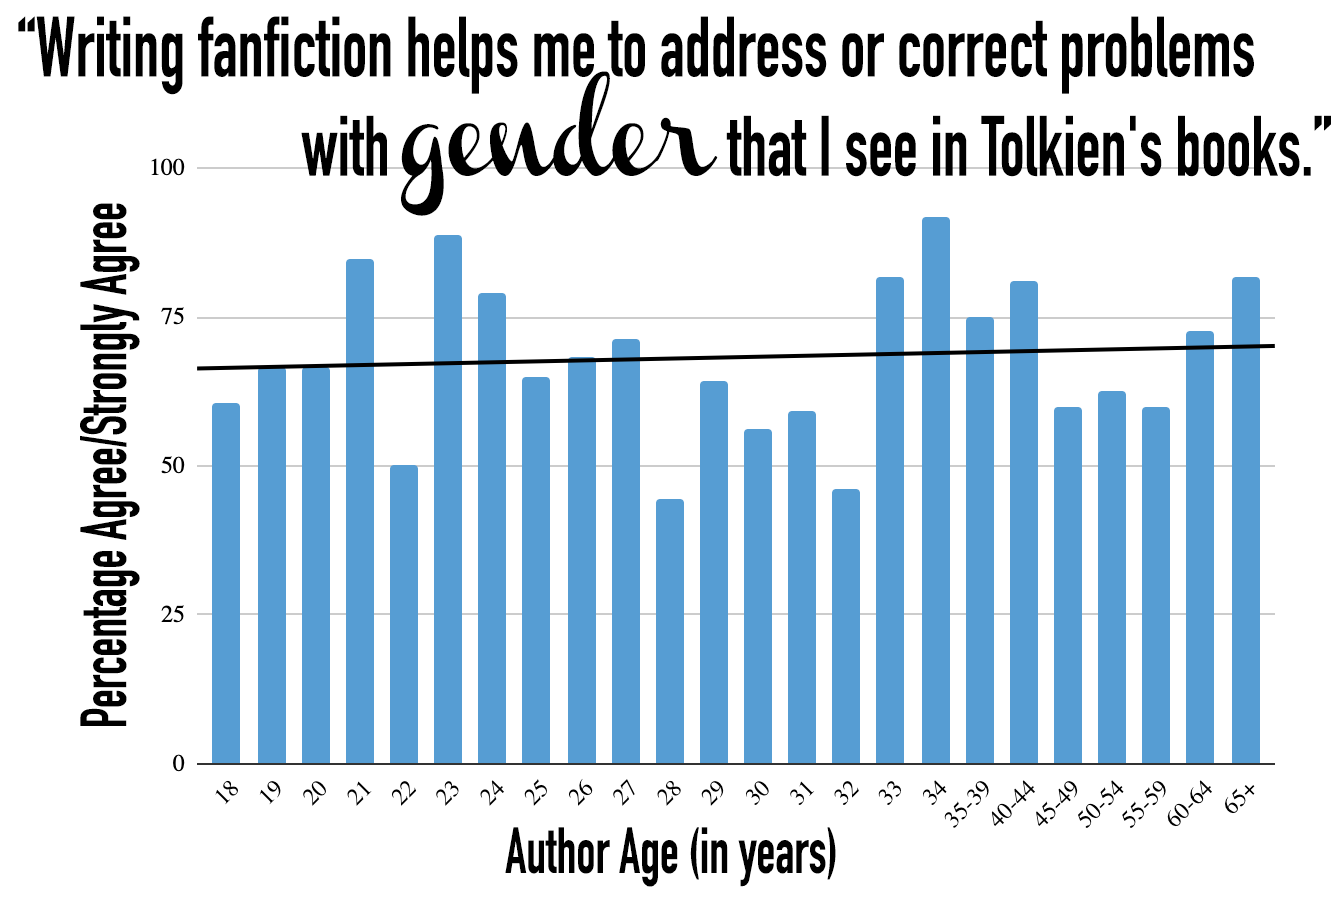 "Writing fanfiction helps me to address or correct problems with gender that I see in Tolkien's books." Bar graph shows the percentage who agree by age with a line of best fit showing a very slight increase in agreement among older authors.